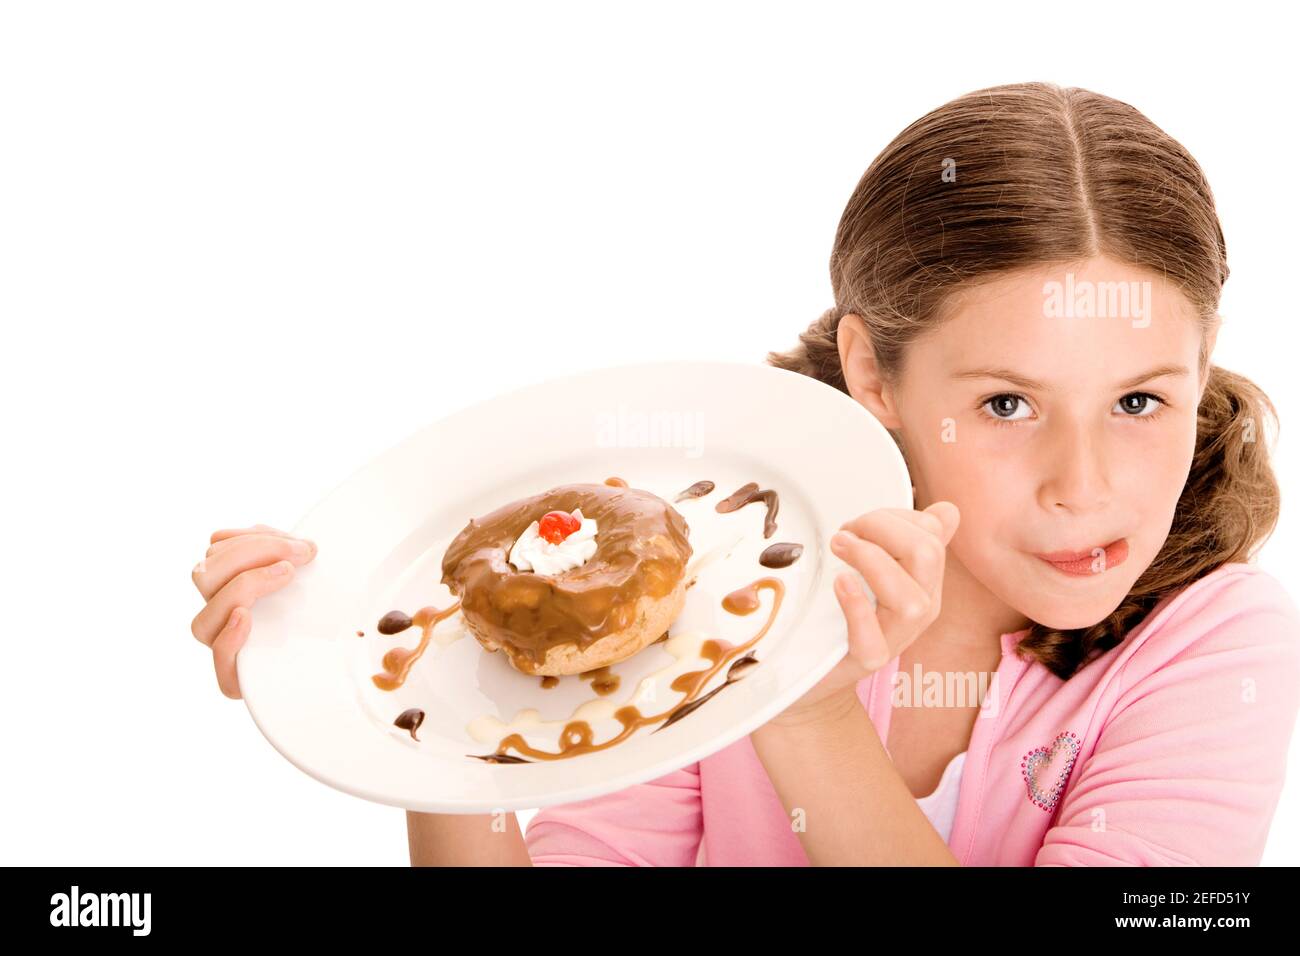 High angle view of a girl holding a donut in a plate licking her lips Stock Photo